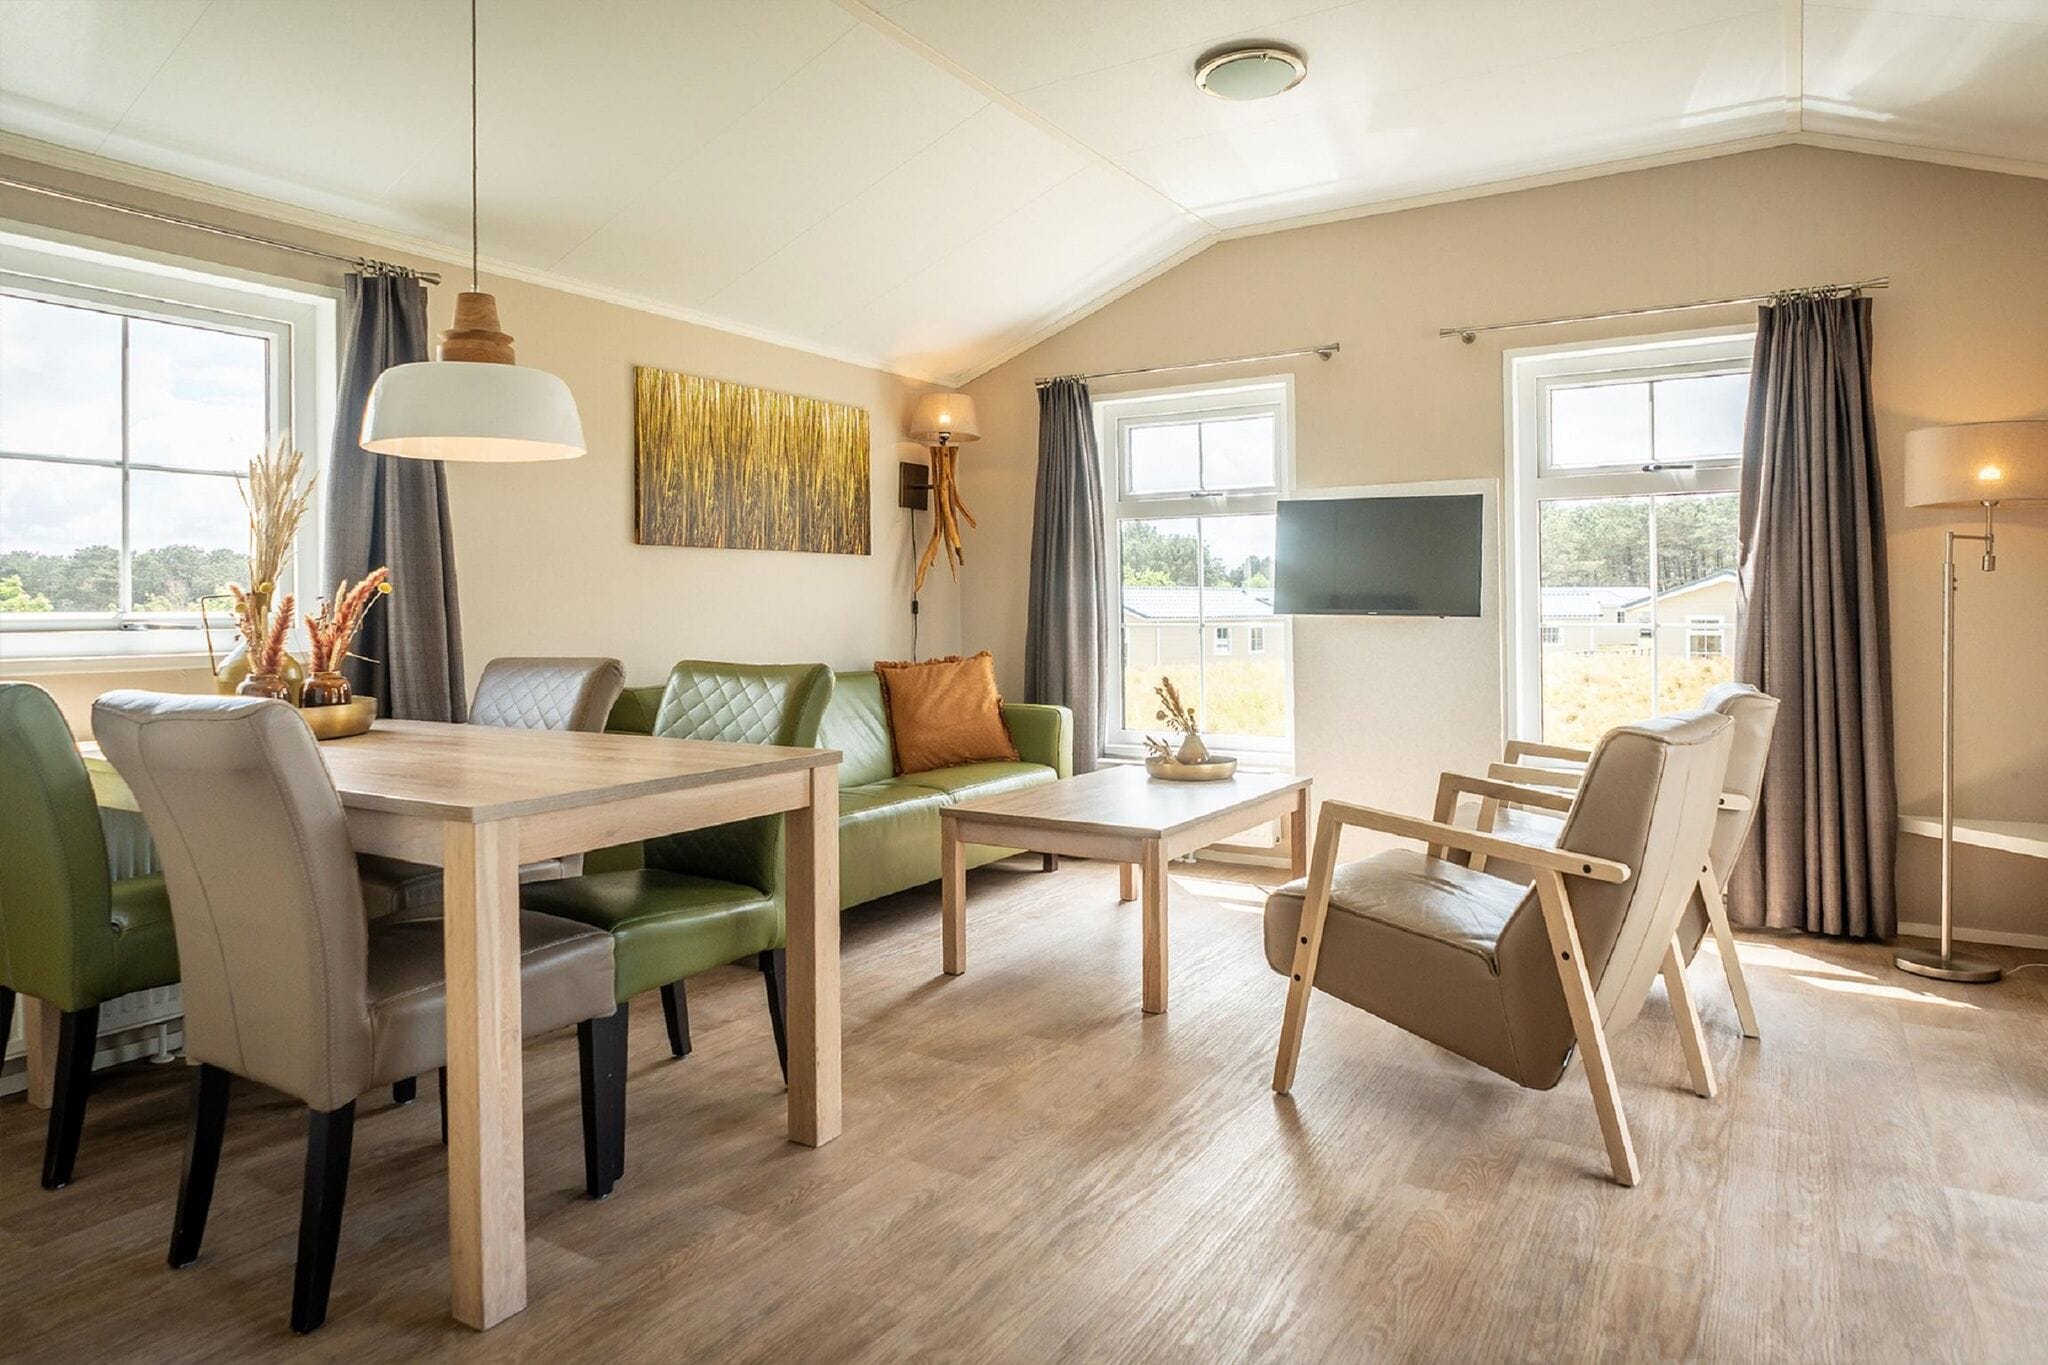 Comfortable chalet in the Texel dune areal